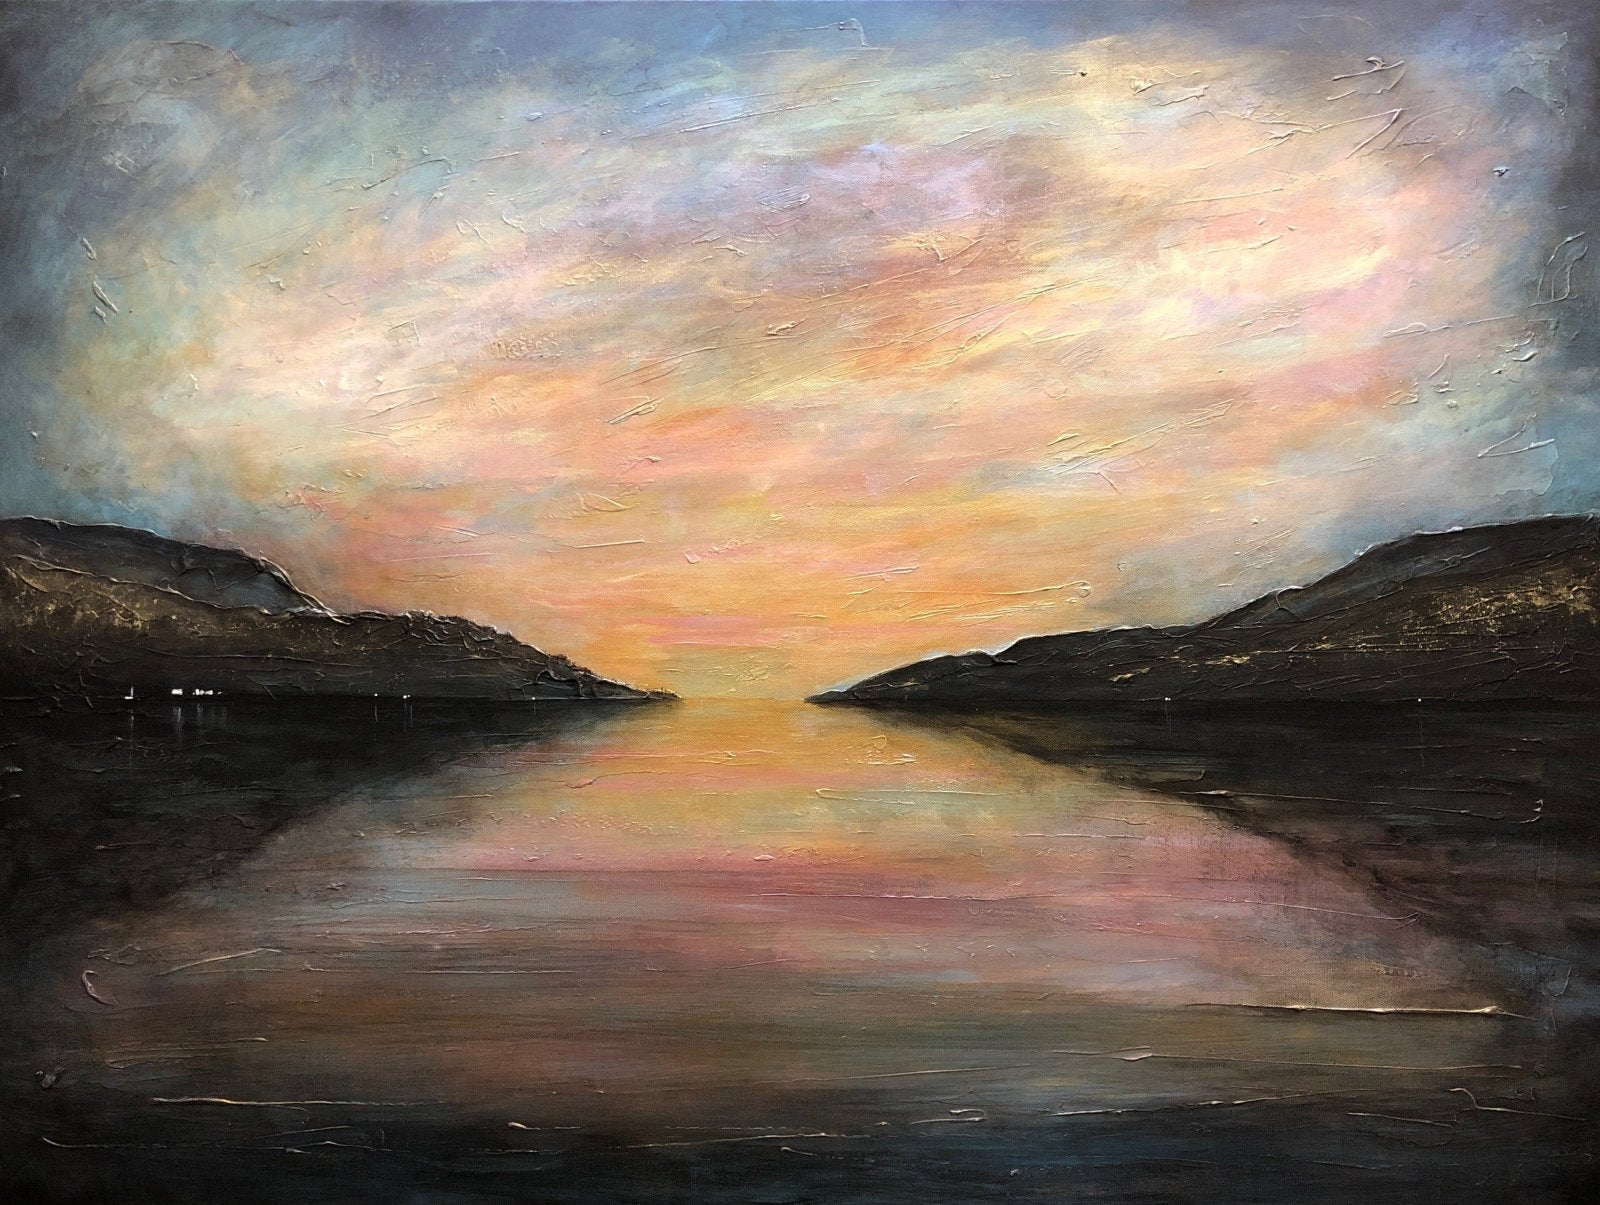 Loch Ness Glow-Signed Art Prints By Scottish Artist Hunter-Scottish Lochs & Mountains Art Gallery-Paintings, Prints, Homeware, Art Gifts From Scotland By Scottish Artist Kevin Hunter